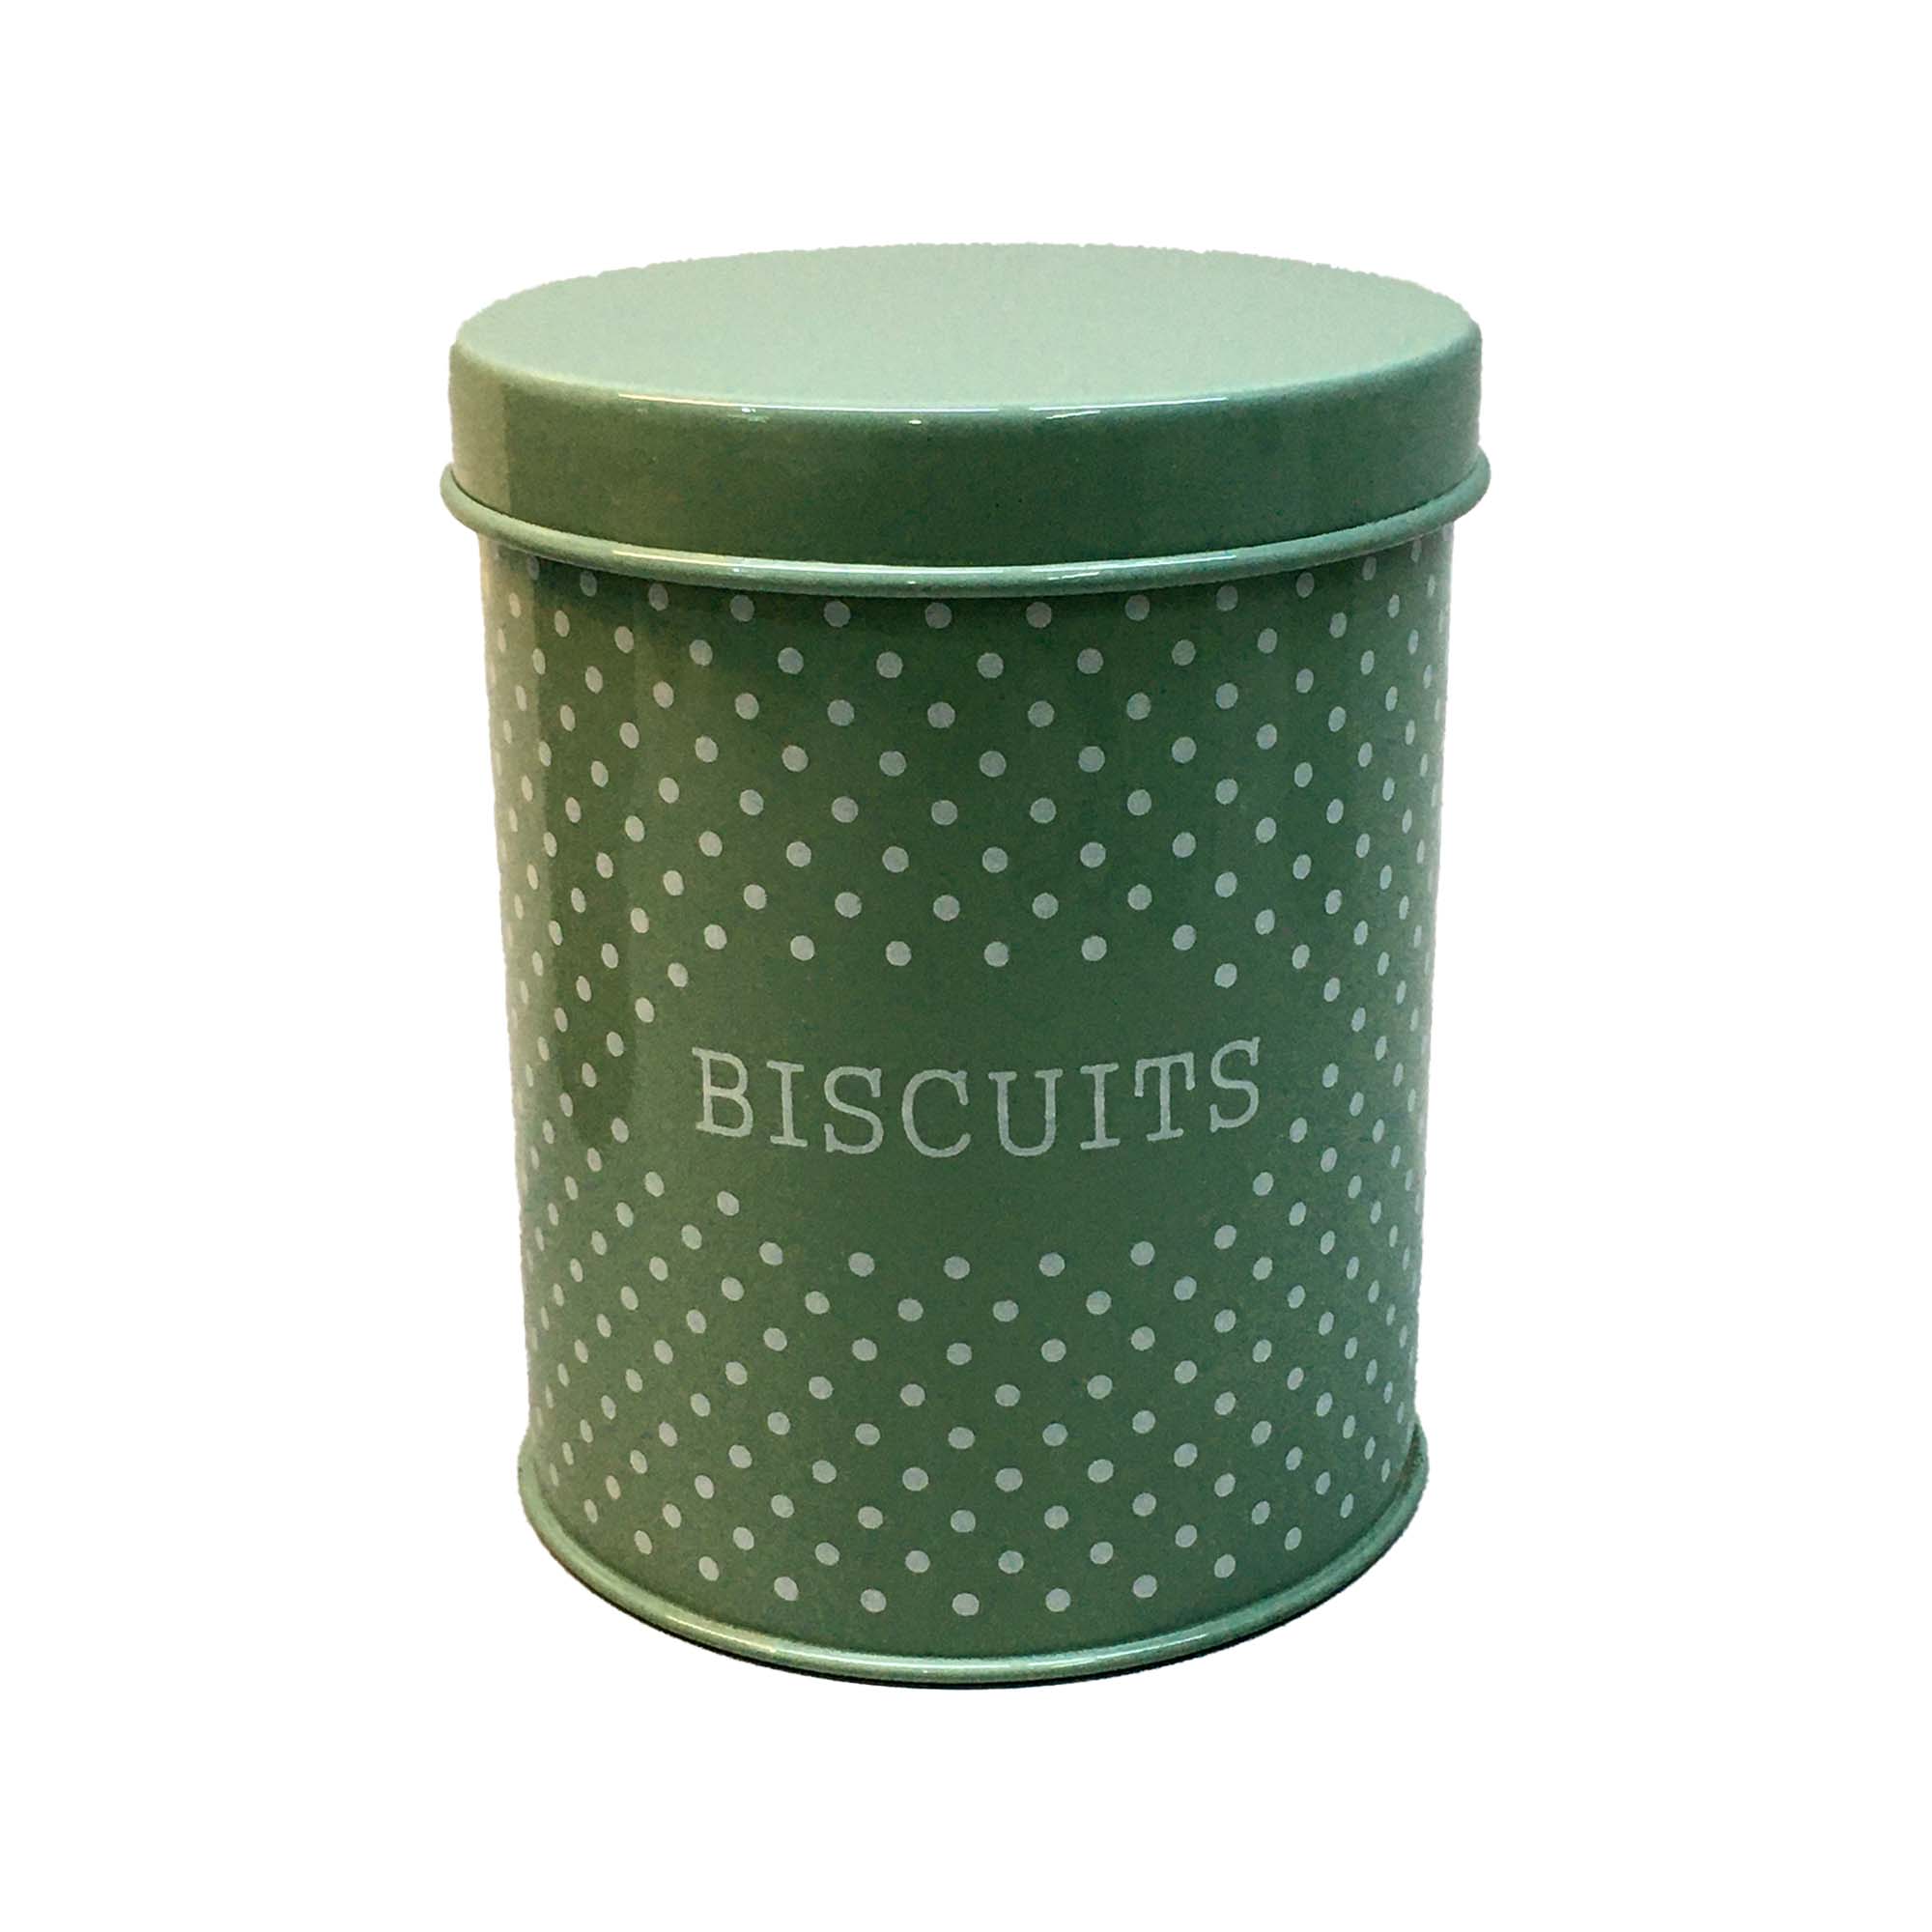 Vintage Tin Biscuit Canister Green & White Polka Dot 12x15cm